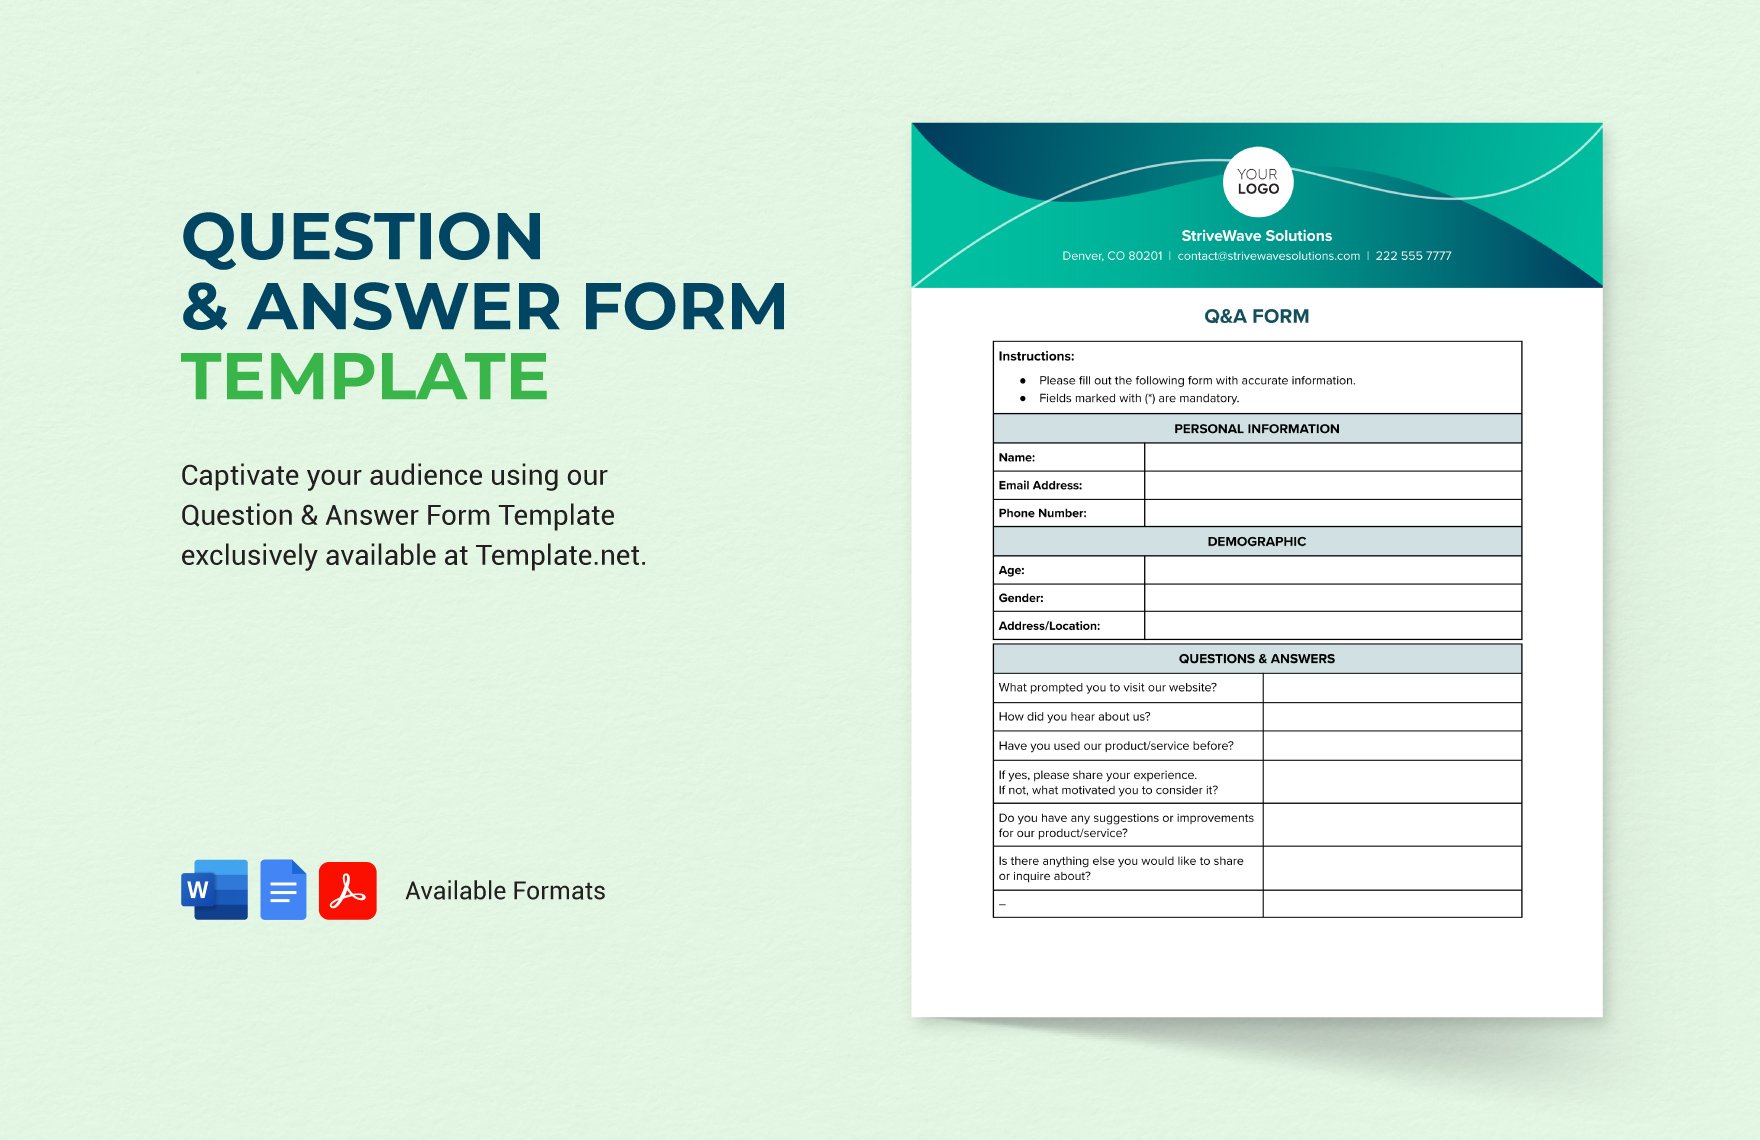 Question & Answer Form Template